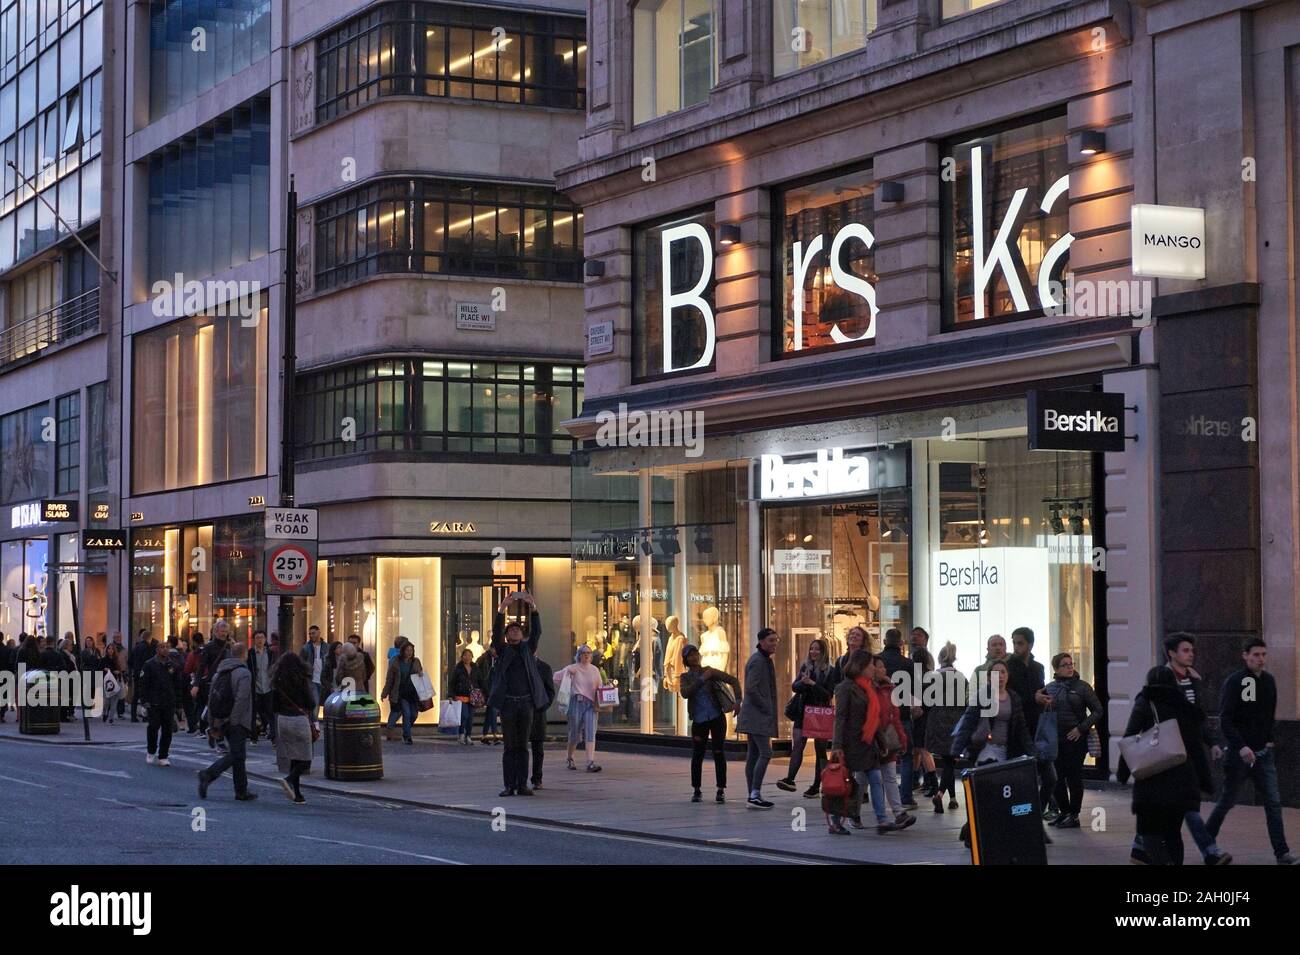 Bershka Oxford Street High Resolution Stock Photography and Images - Alamy